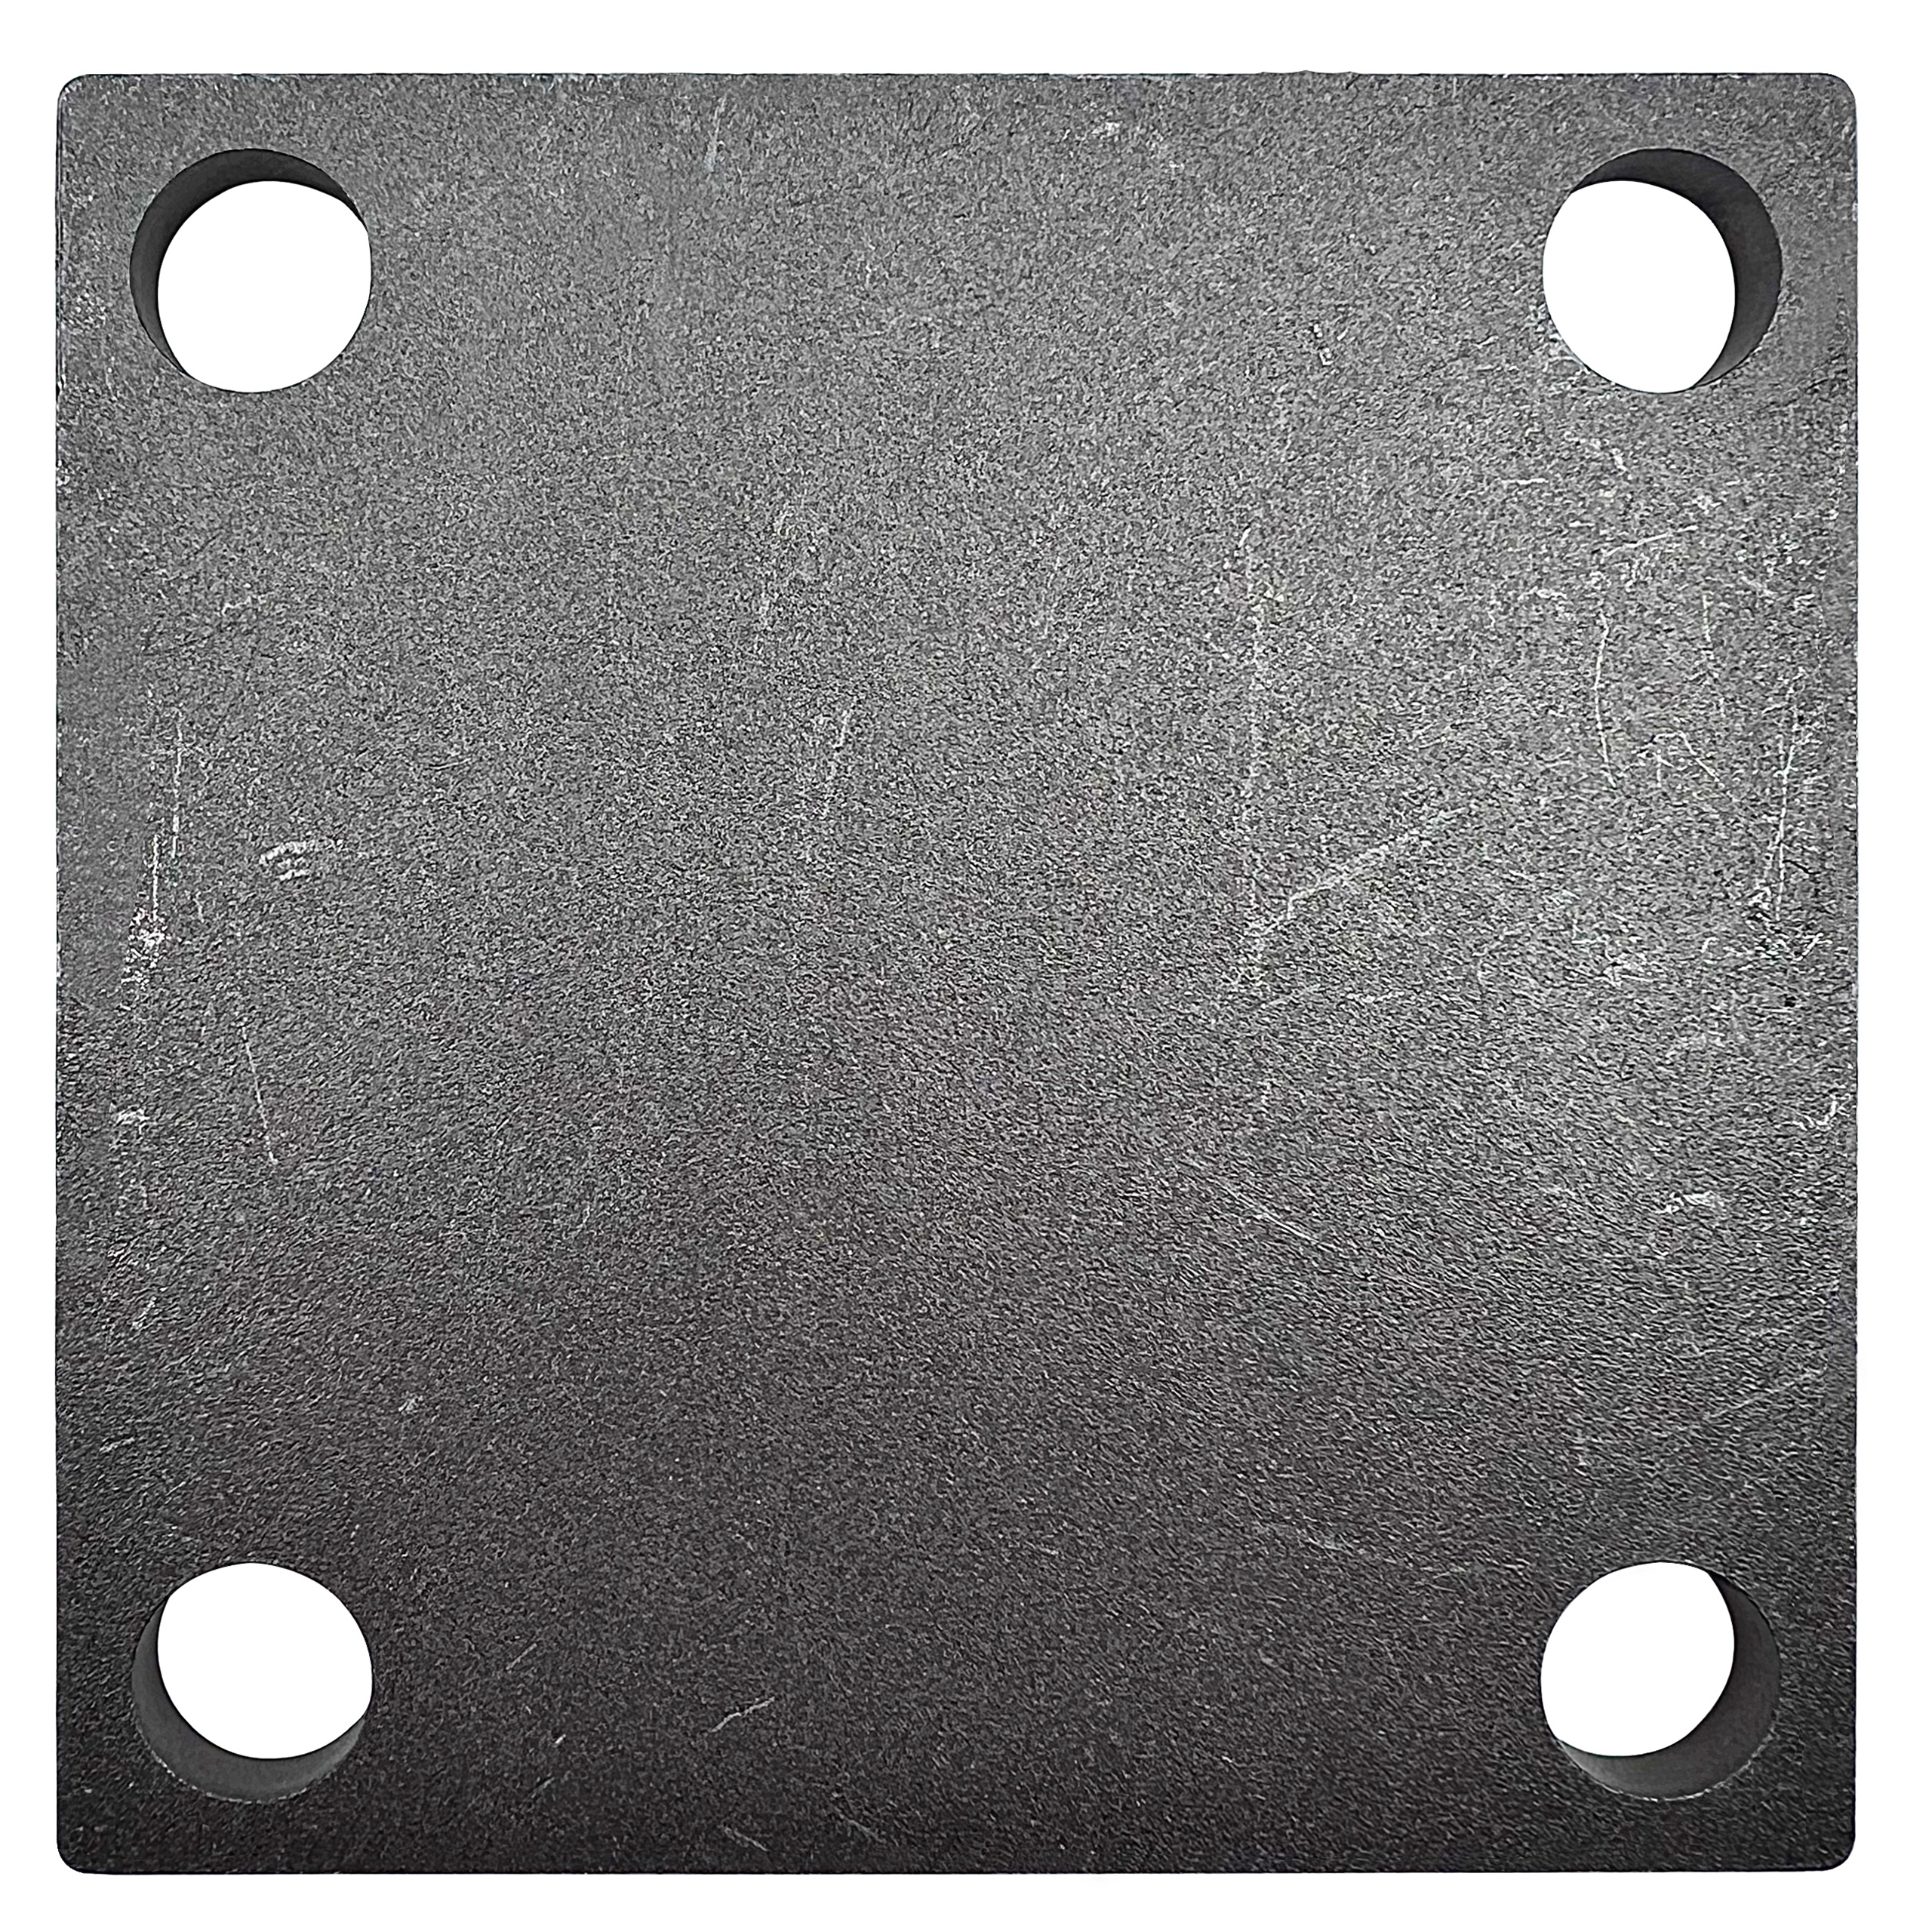 5x5" Weldable Square Steel Metal Baseplate – A36 Heavy Duty Carbon Steel